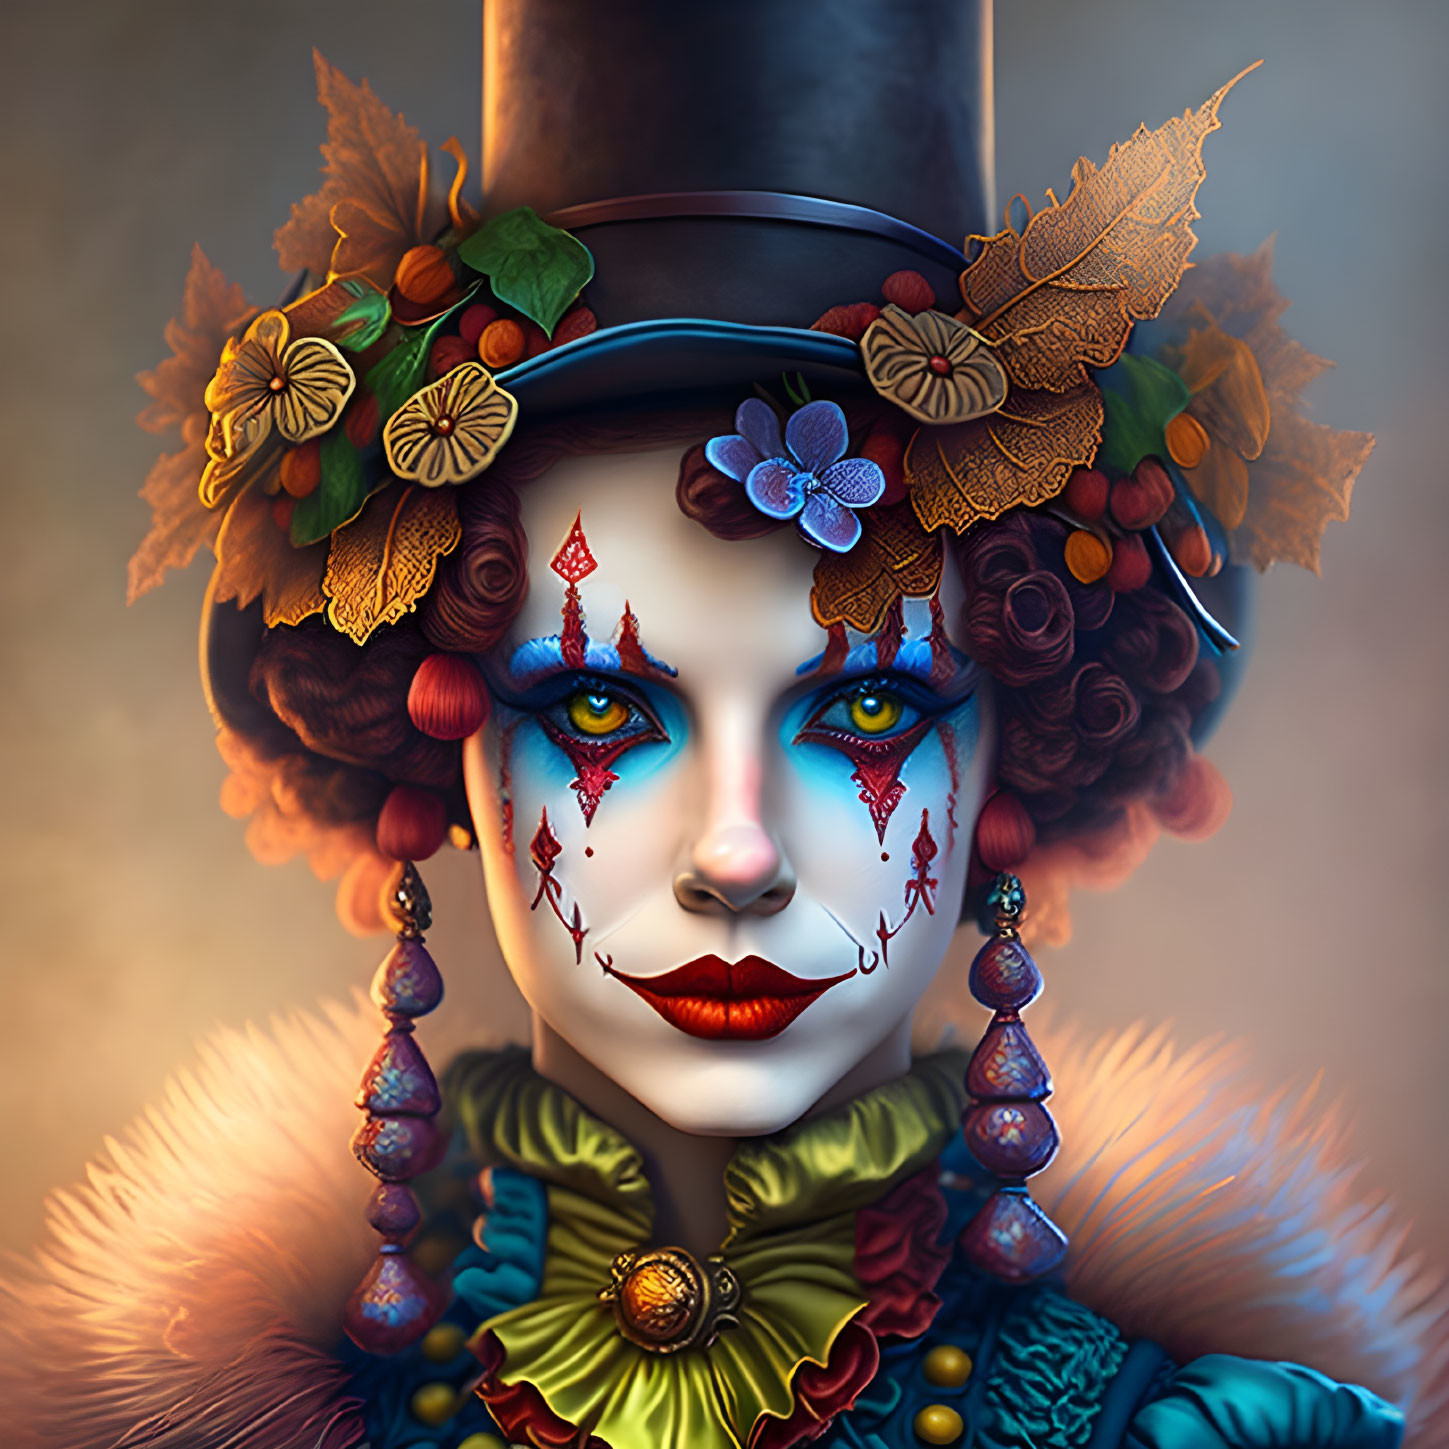 Colorful Clown Makeup Portrait with Top Hat and Floral Decorations